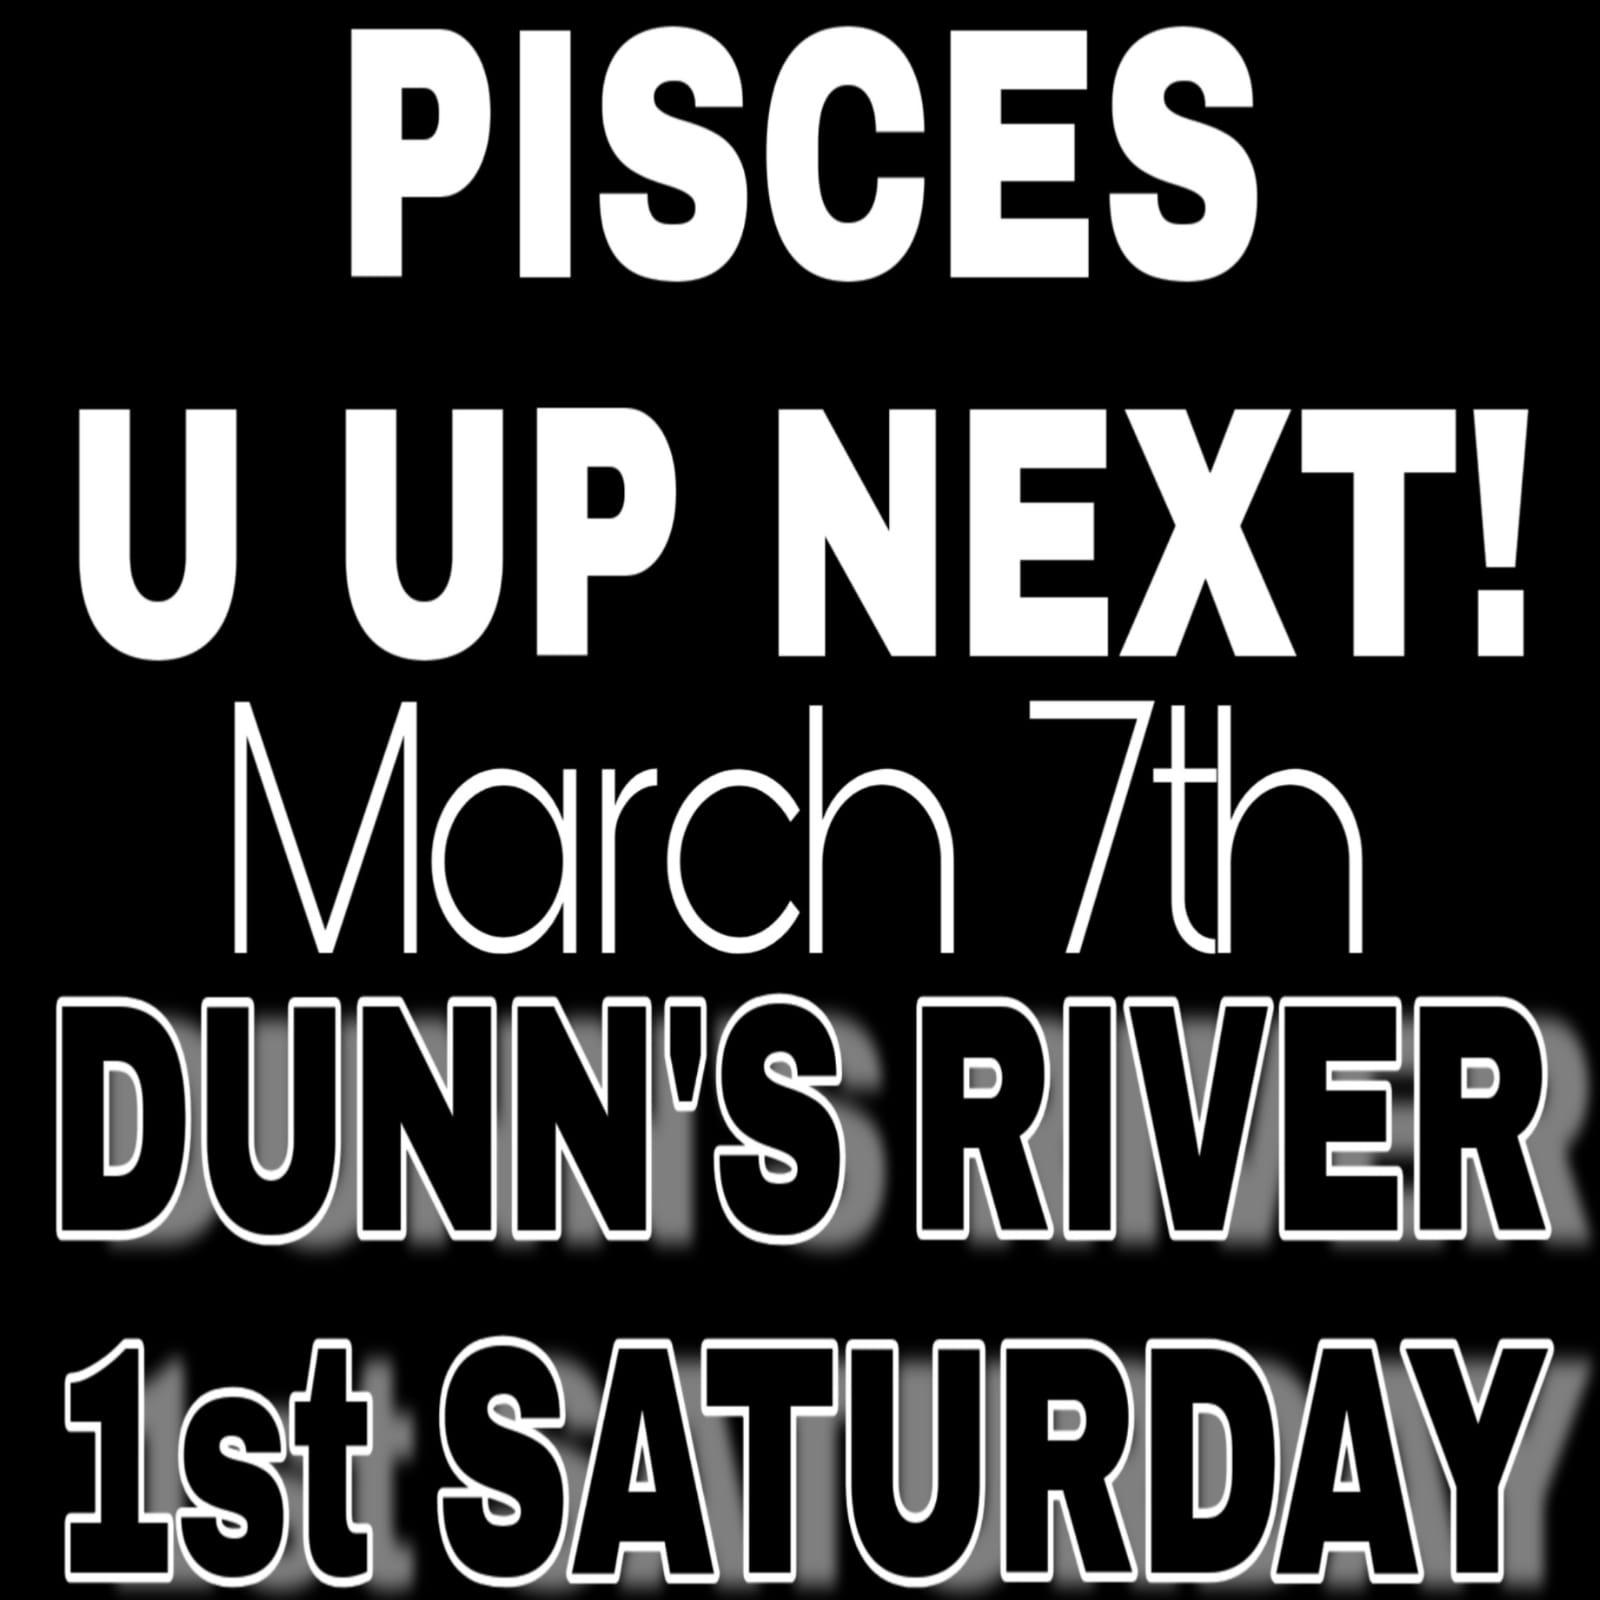 1ST SATURDAY WITH DJKIRKY-C- @DUNNS RIVER ISLAND CAFE,TAMPA FLORIDA